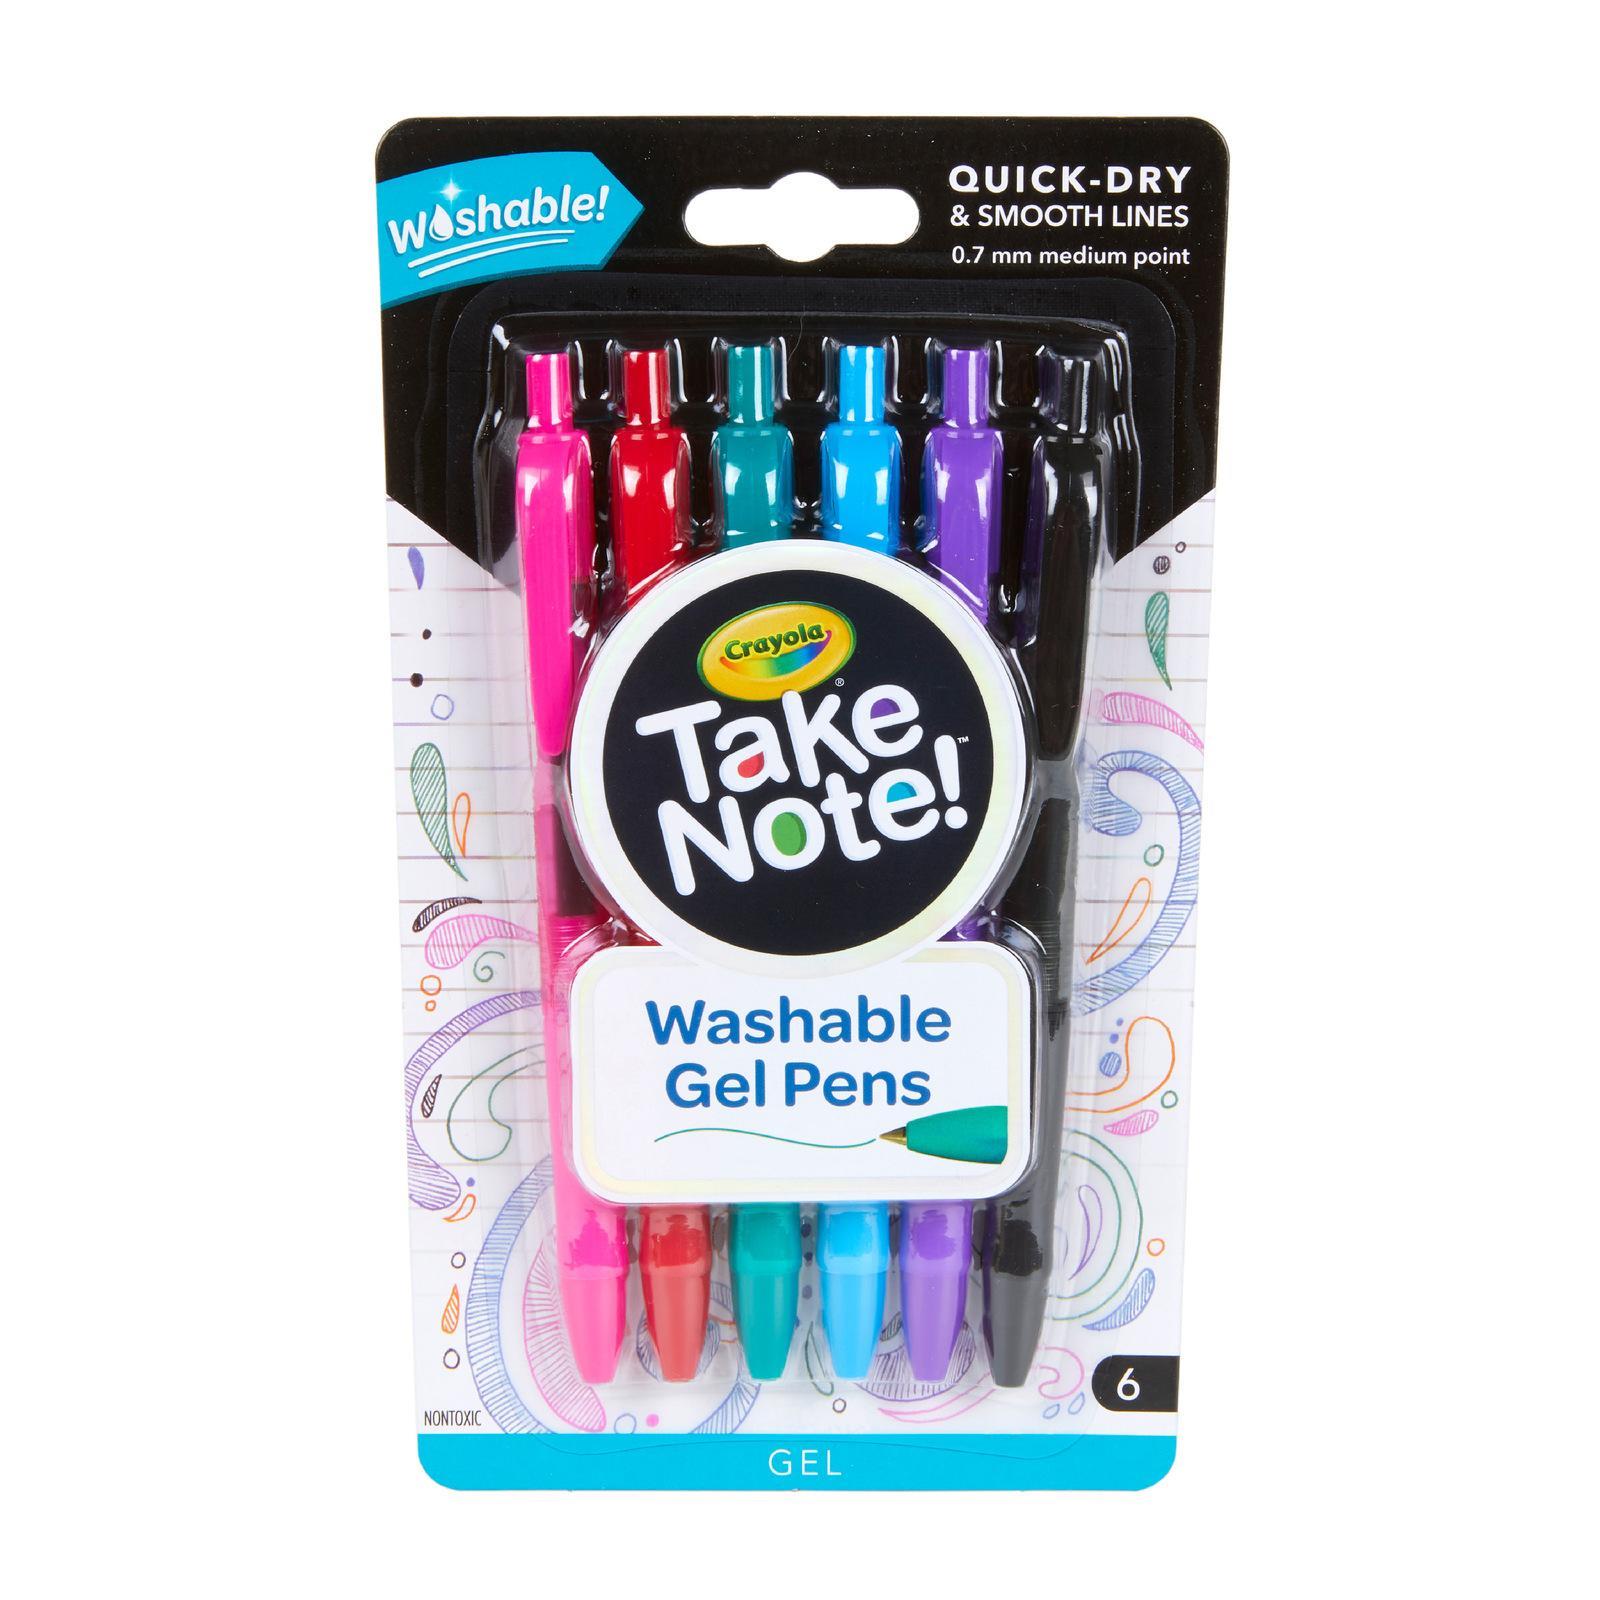 Crayola Take Note! Washable Gel Pens Pack of 6